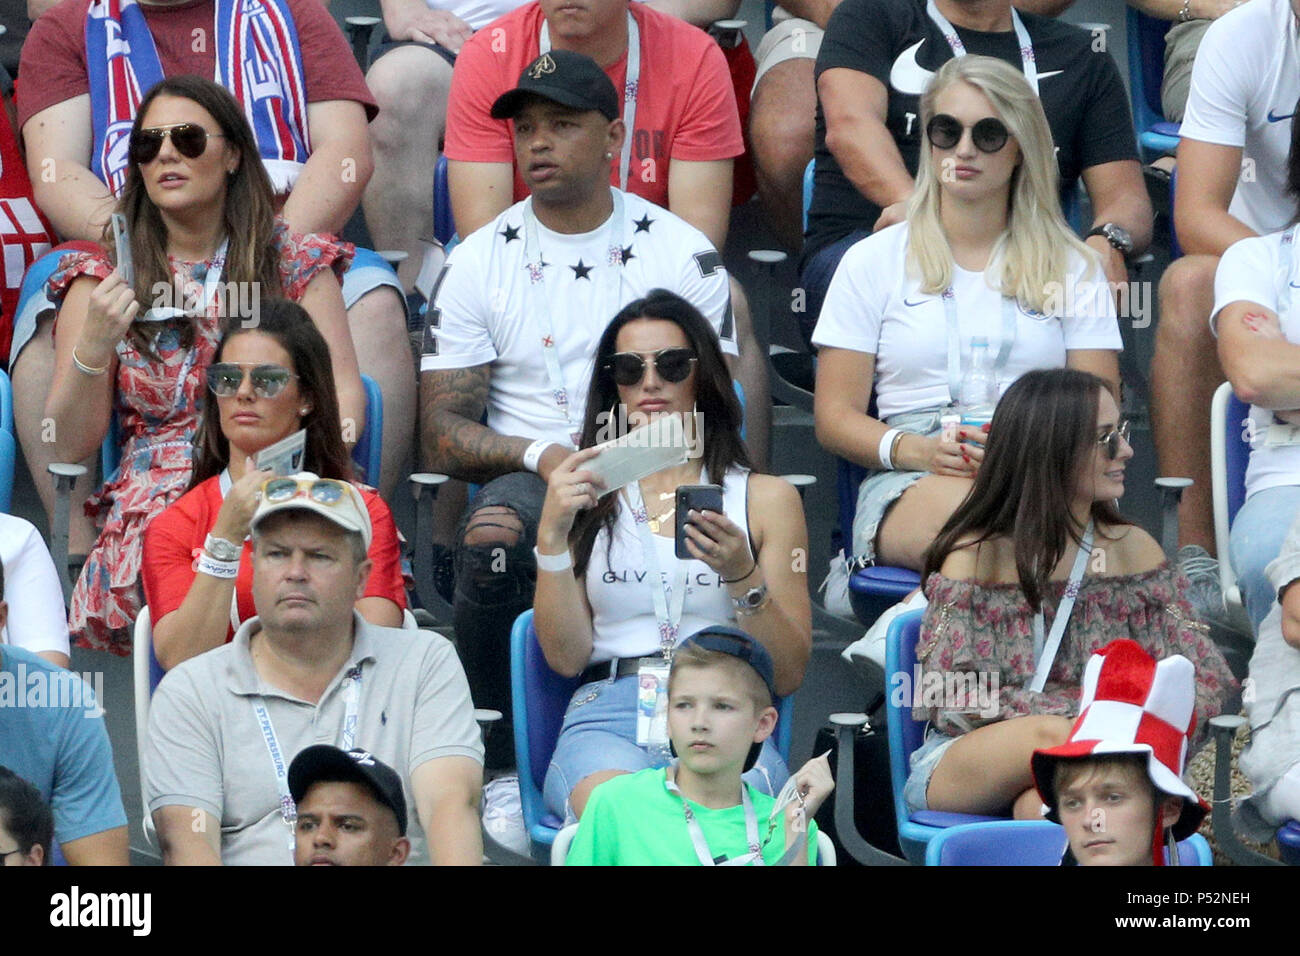 Rebekah Vardy (left, second row), wife of England's Jamie Vardy and Annabel Peyton (top right), fiancee of England goalkeeper Jack Butland, during the FIFA World Cup Group G match at the Nizhny Novgorod Stadium. Stock Photo